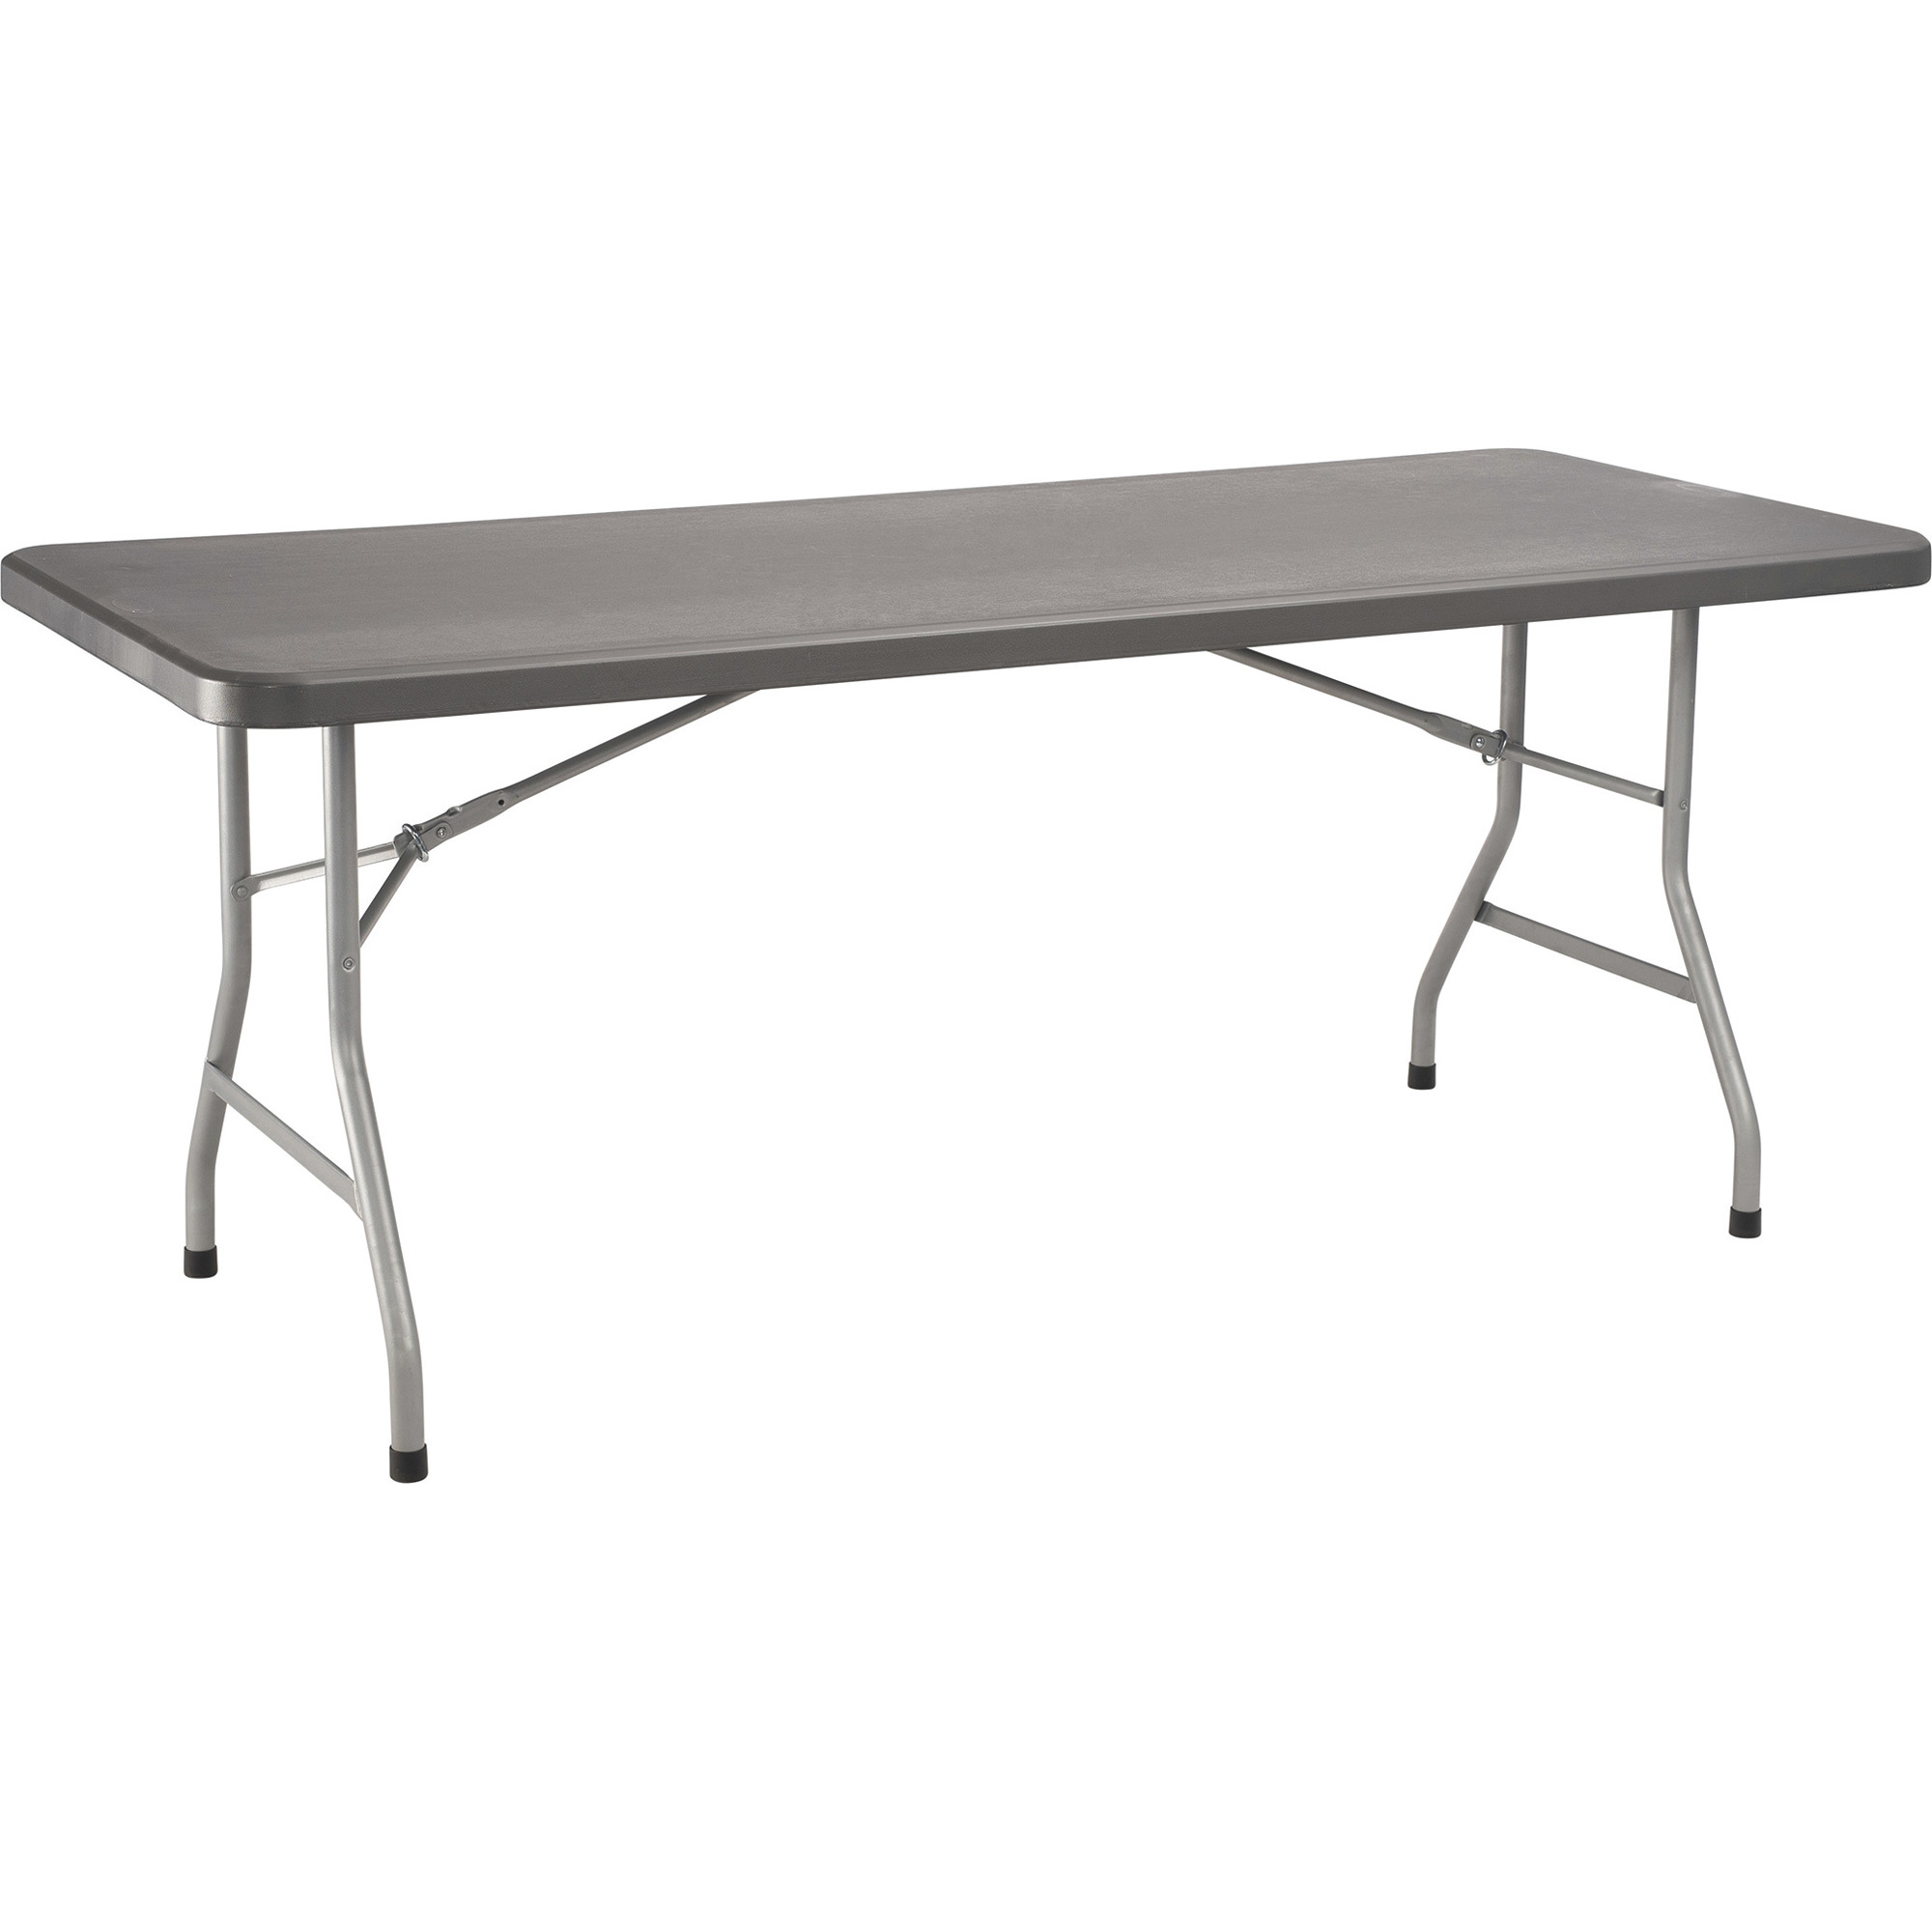 National Public Seating Corp. Heavy-Duty Folding Table â 30Inch x 72Inch, Model BT3072-20